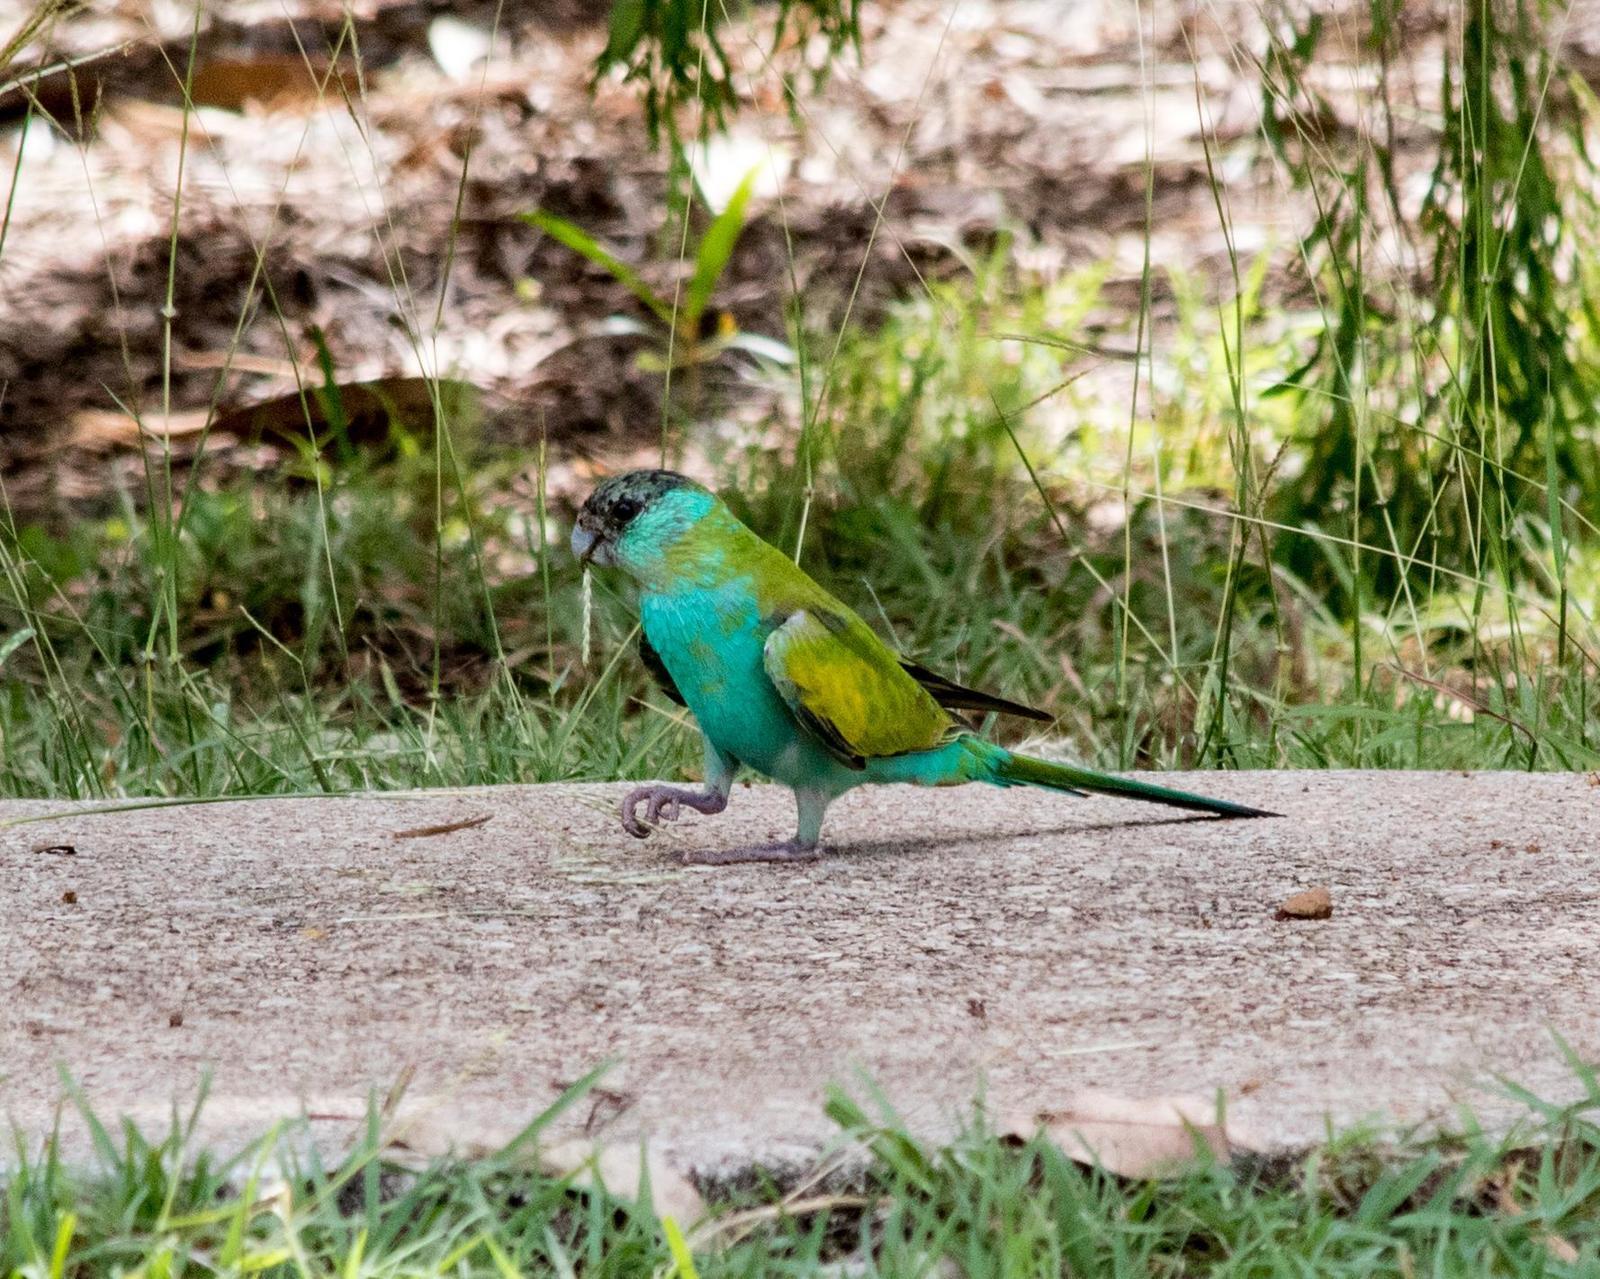 Hooded Parrot Photo by Mark Baldwin